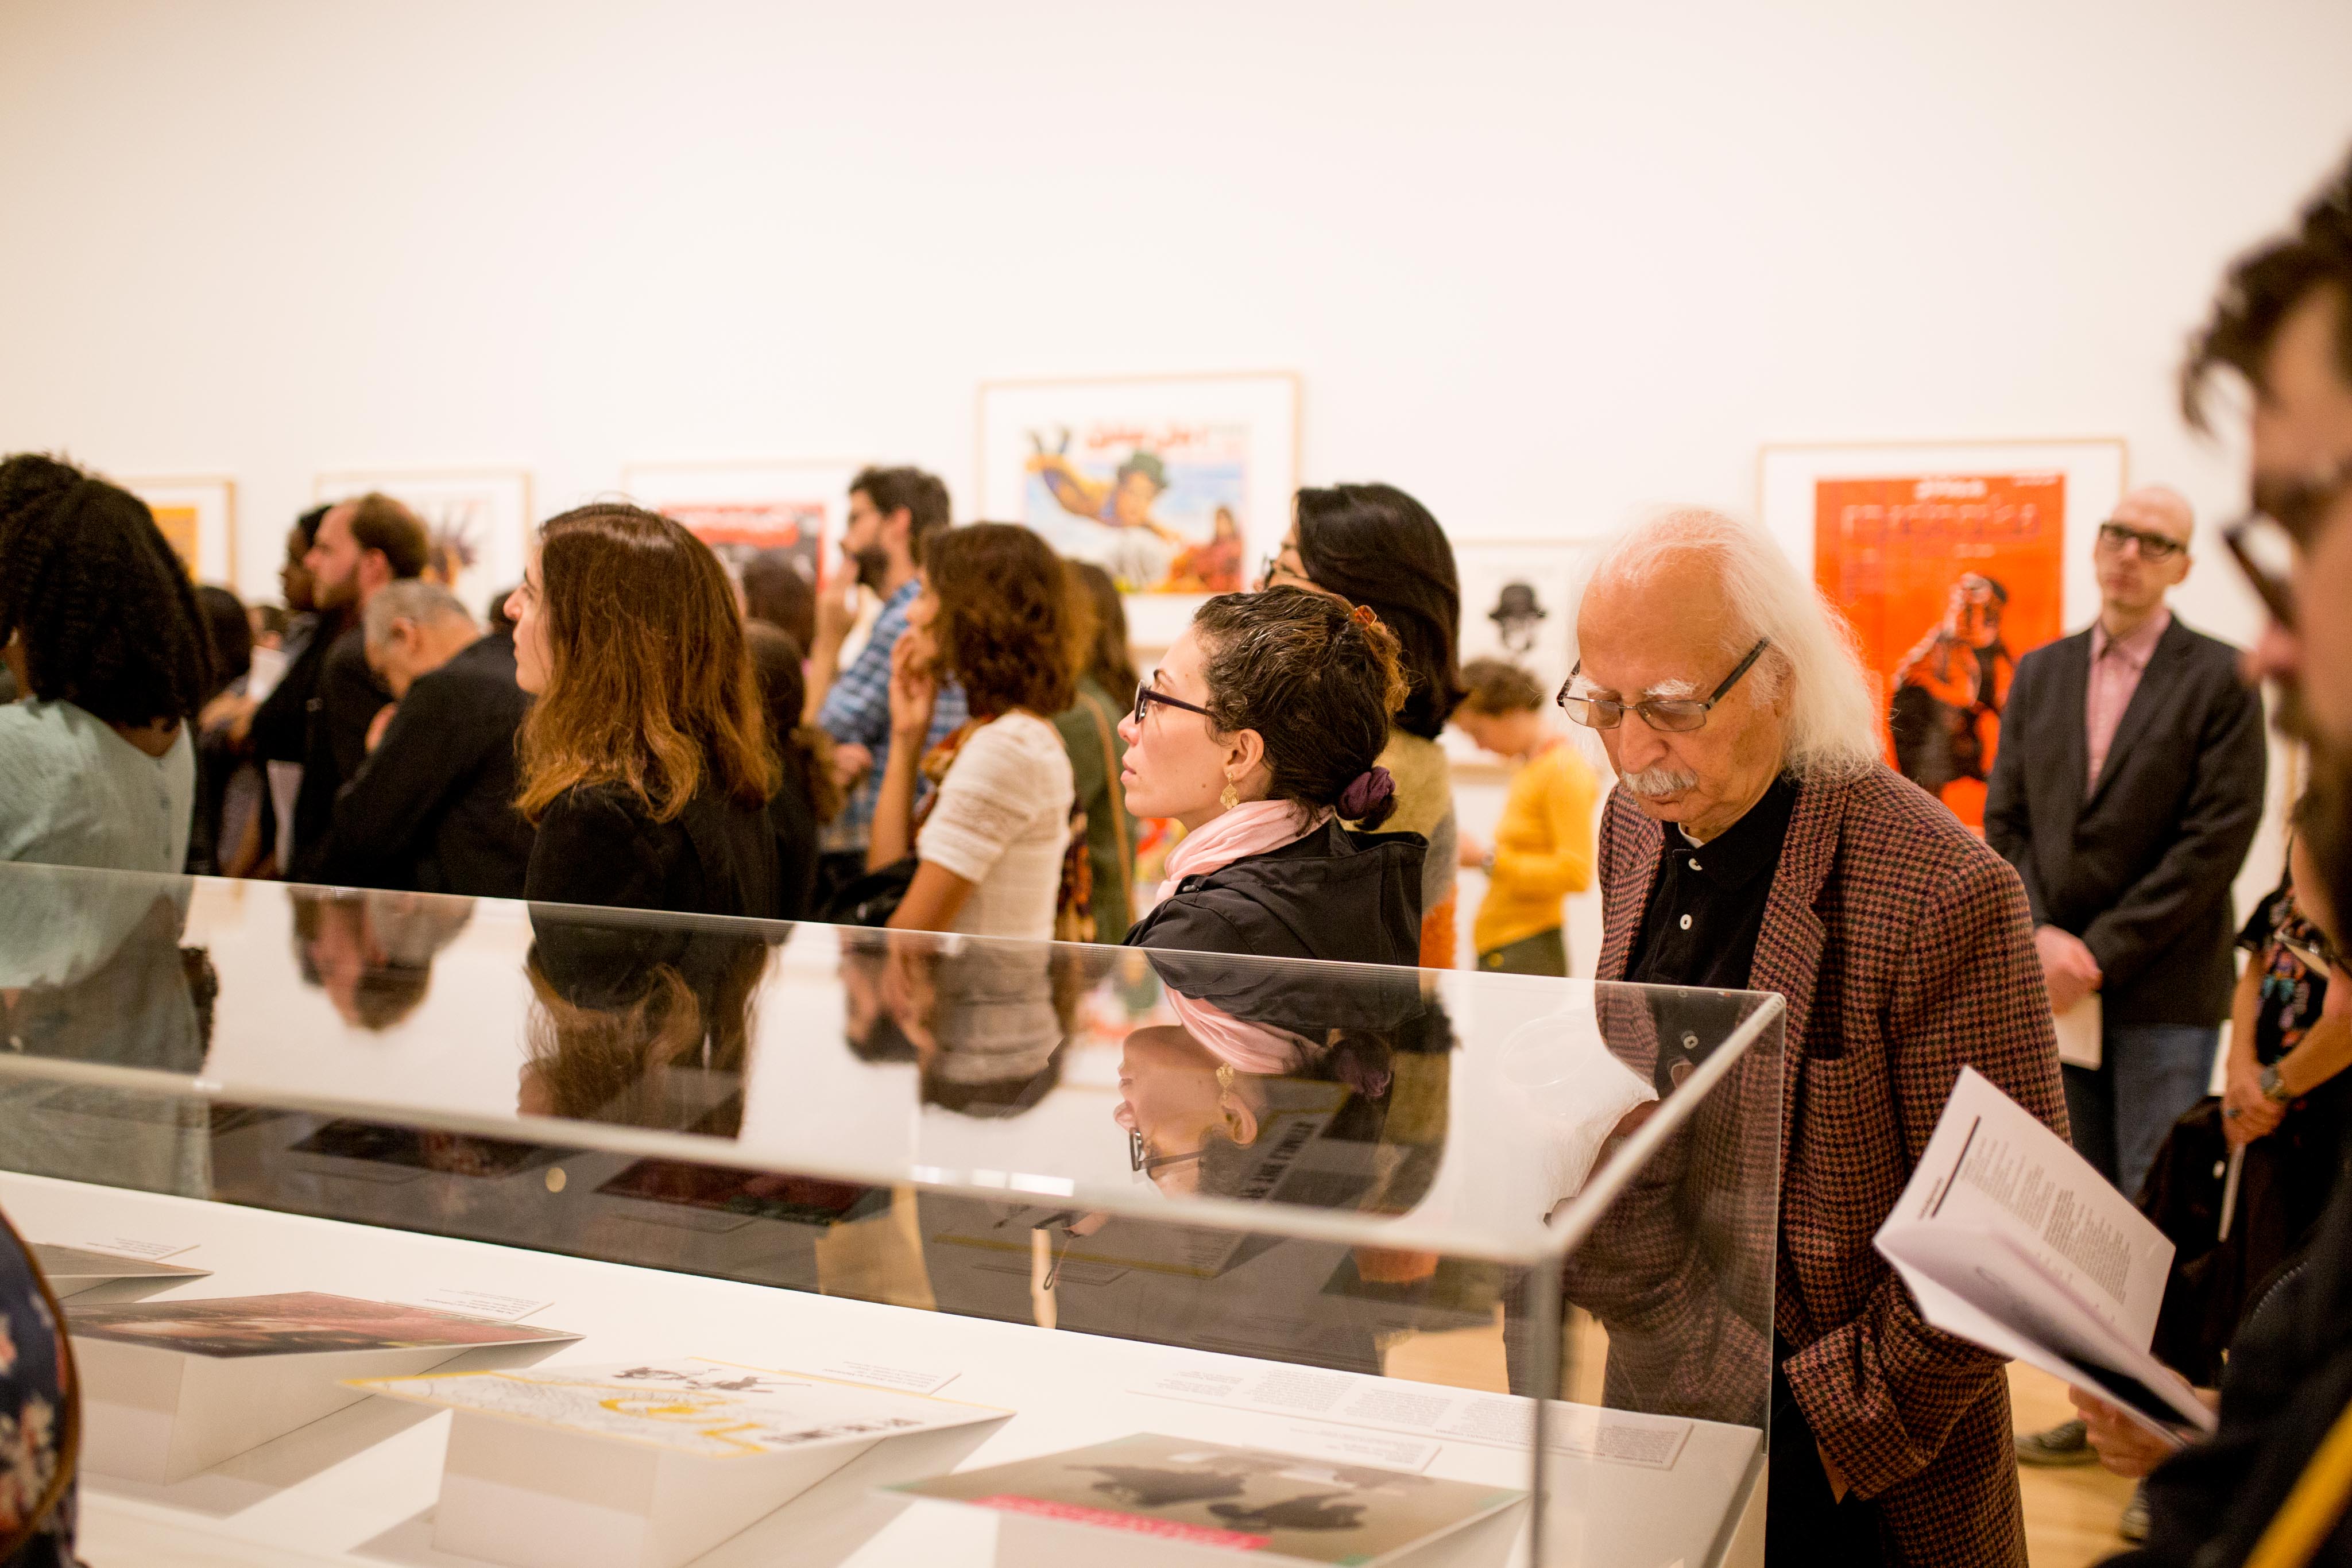 Attendees at the opening for the Salaam Cinema exhibition. Image courtesy of the Block Museum of Art.